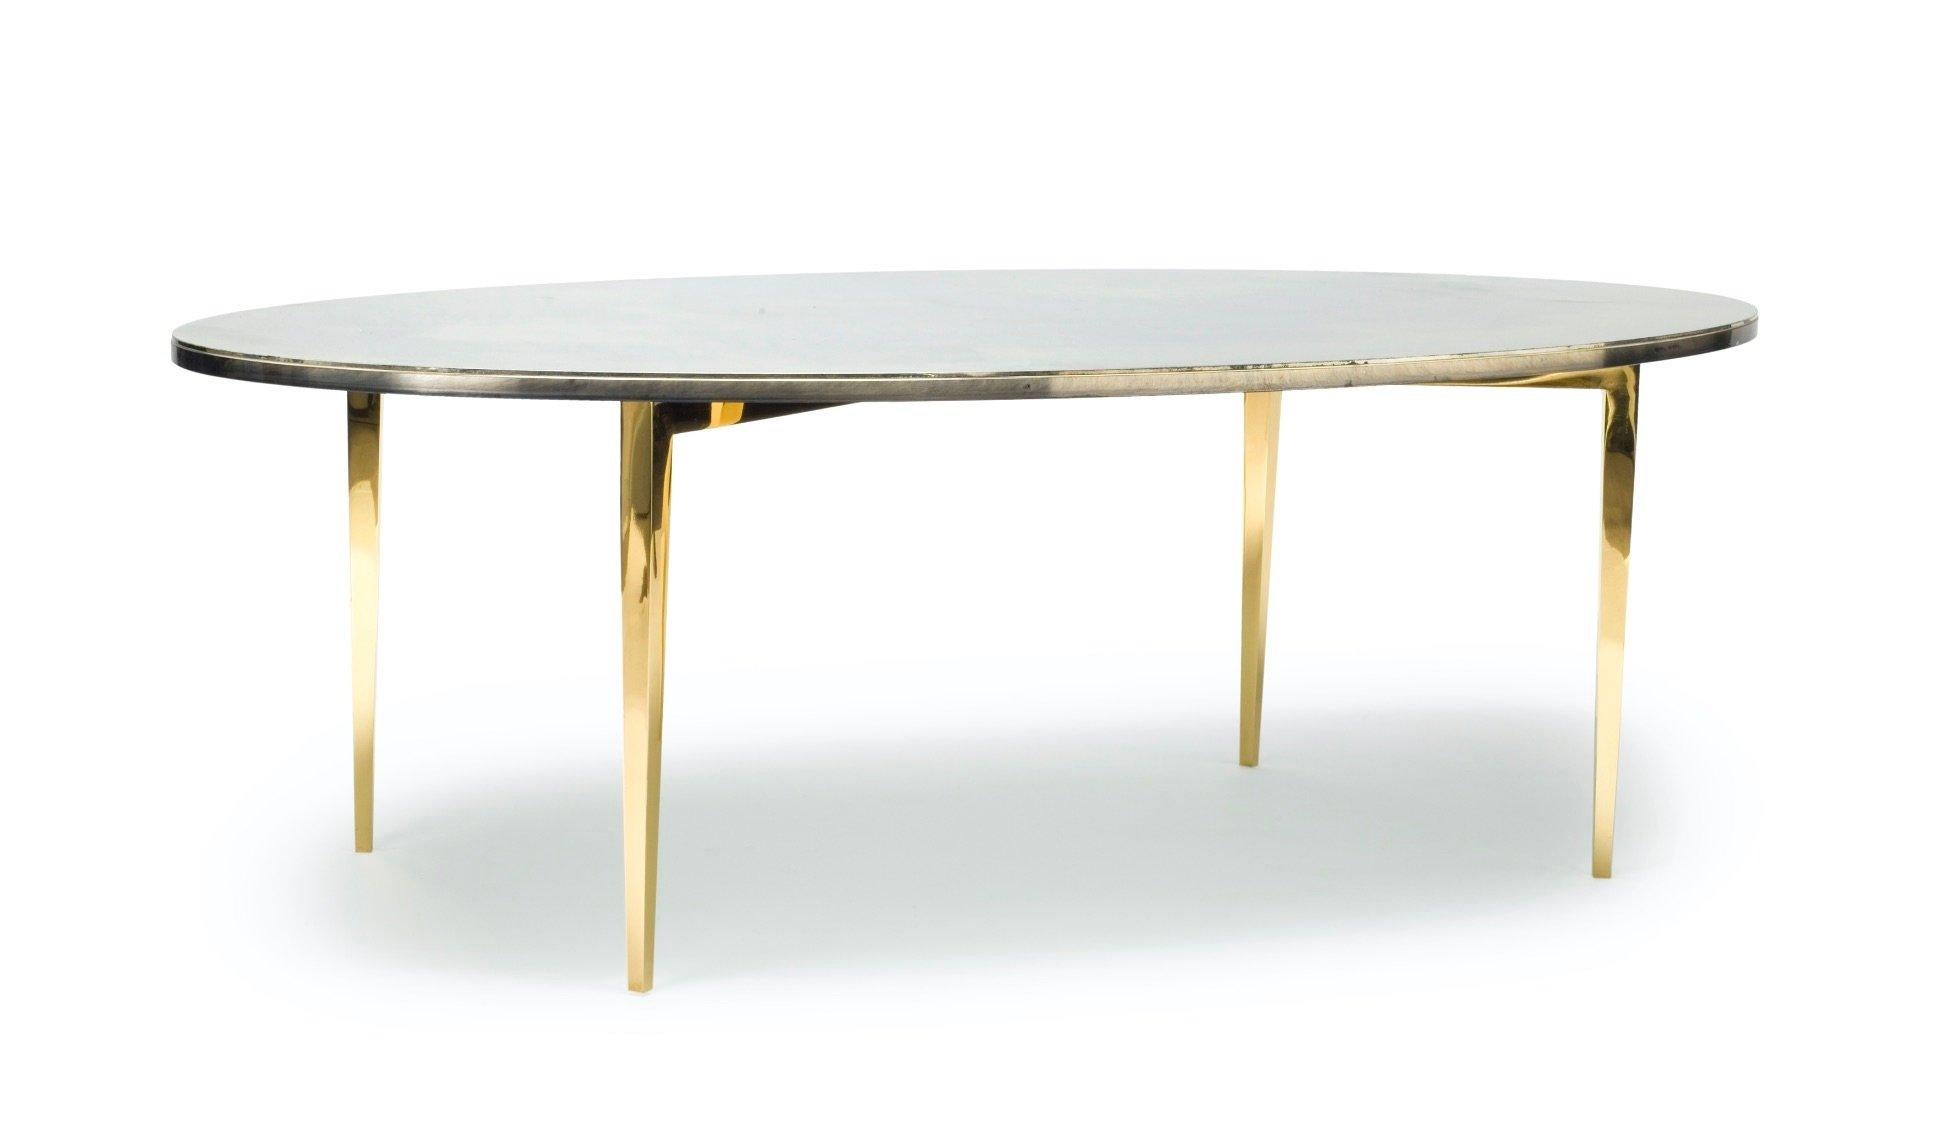 Oval glass cocktail table on brass base with hand-silvered glass top and protected with a glass coverslip.

Developed and created in England, the magical technique to create the bespoke finish on the glass is unique every time. No two pieces will